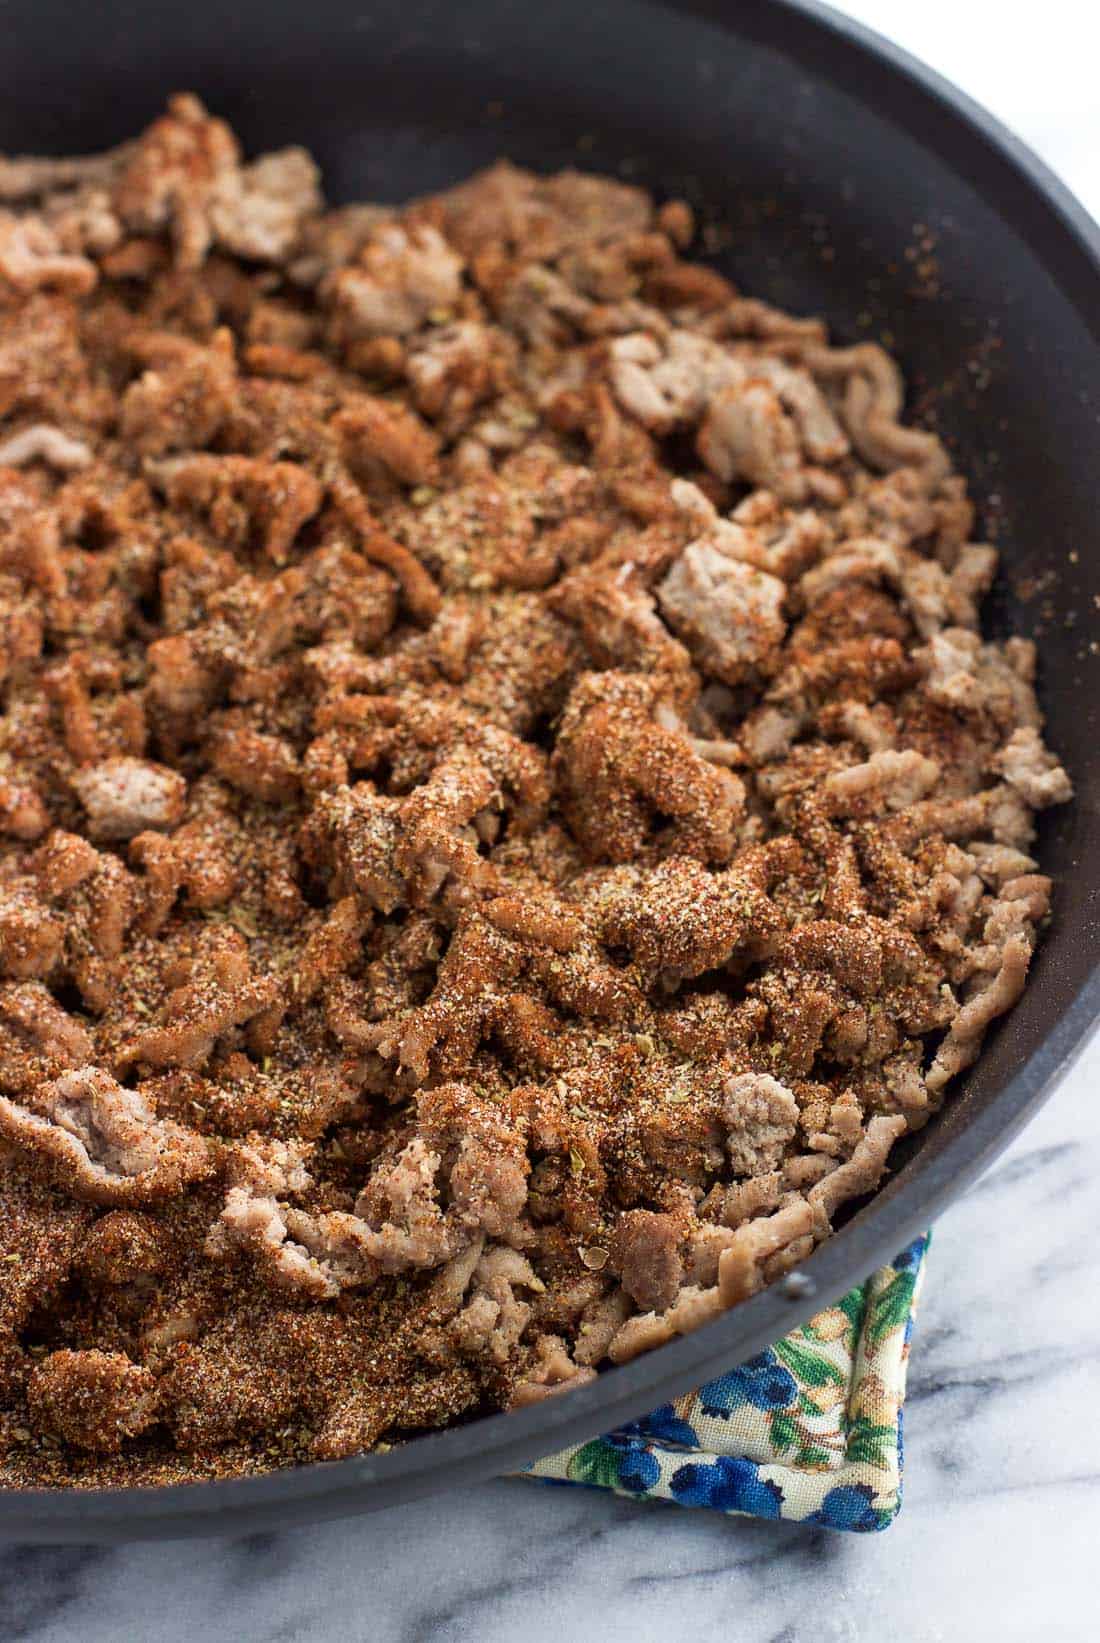 Taco seasoning sprinkled over cooked and crumbled ground beef in a skillet.